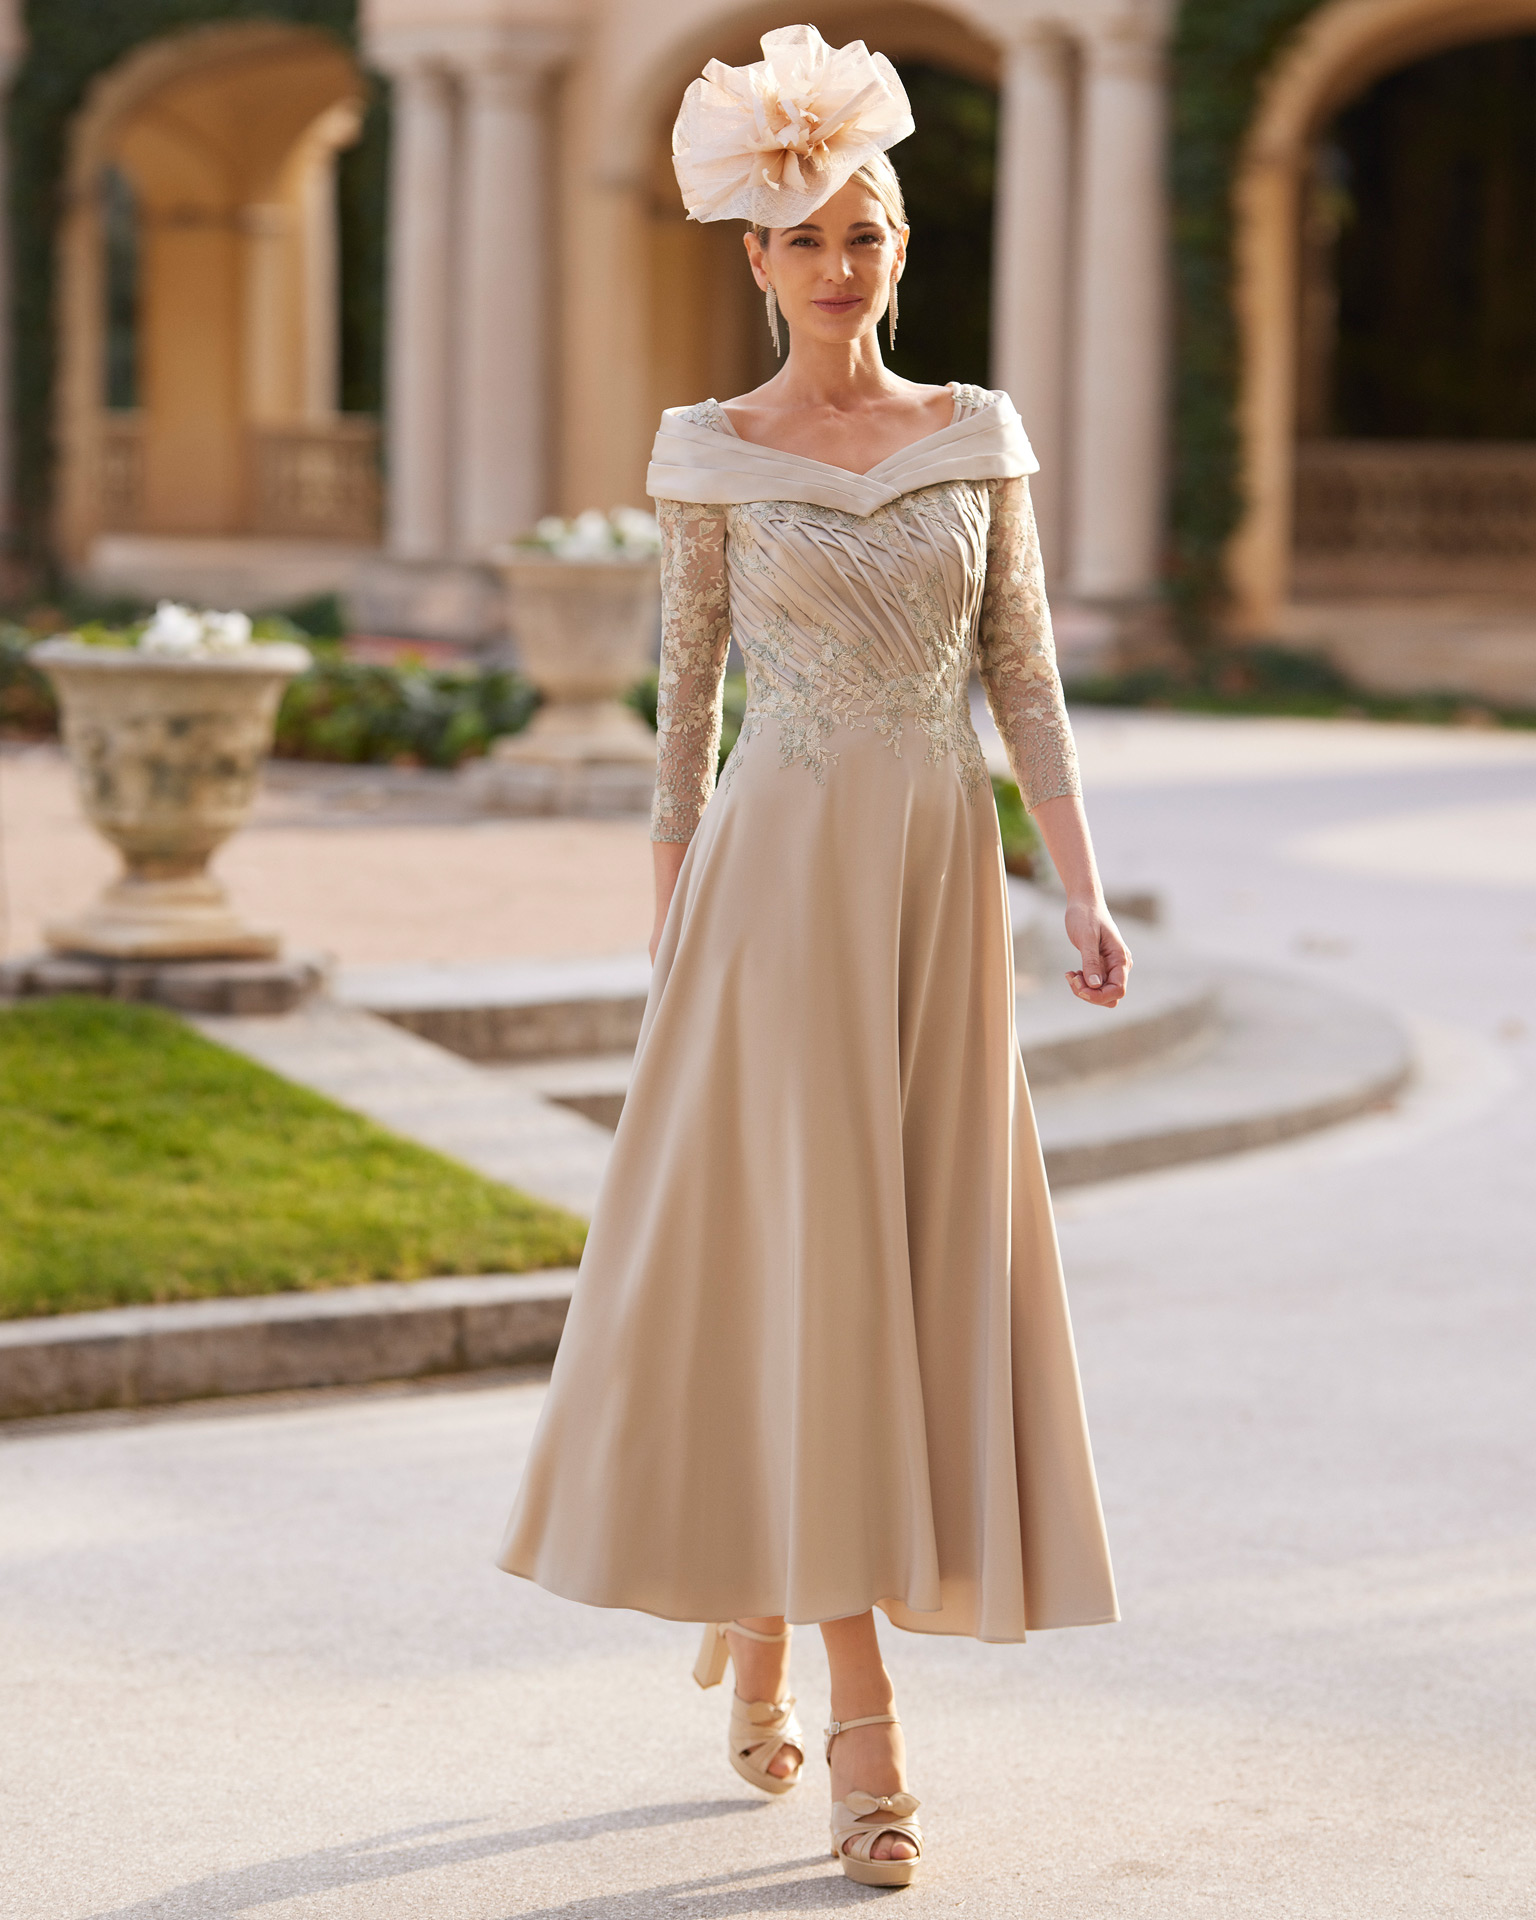 Elegant midi cocktail dress. Crafted with triacetate and lace. With off-the-shoulder neckline and three-quarter sleeves. Couture Club outfit. MARFIL_BARCELONA.